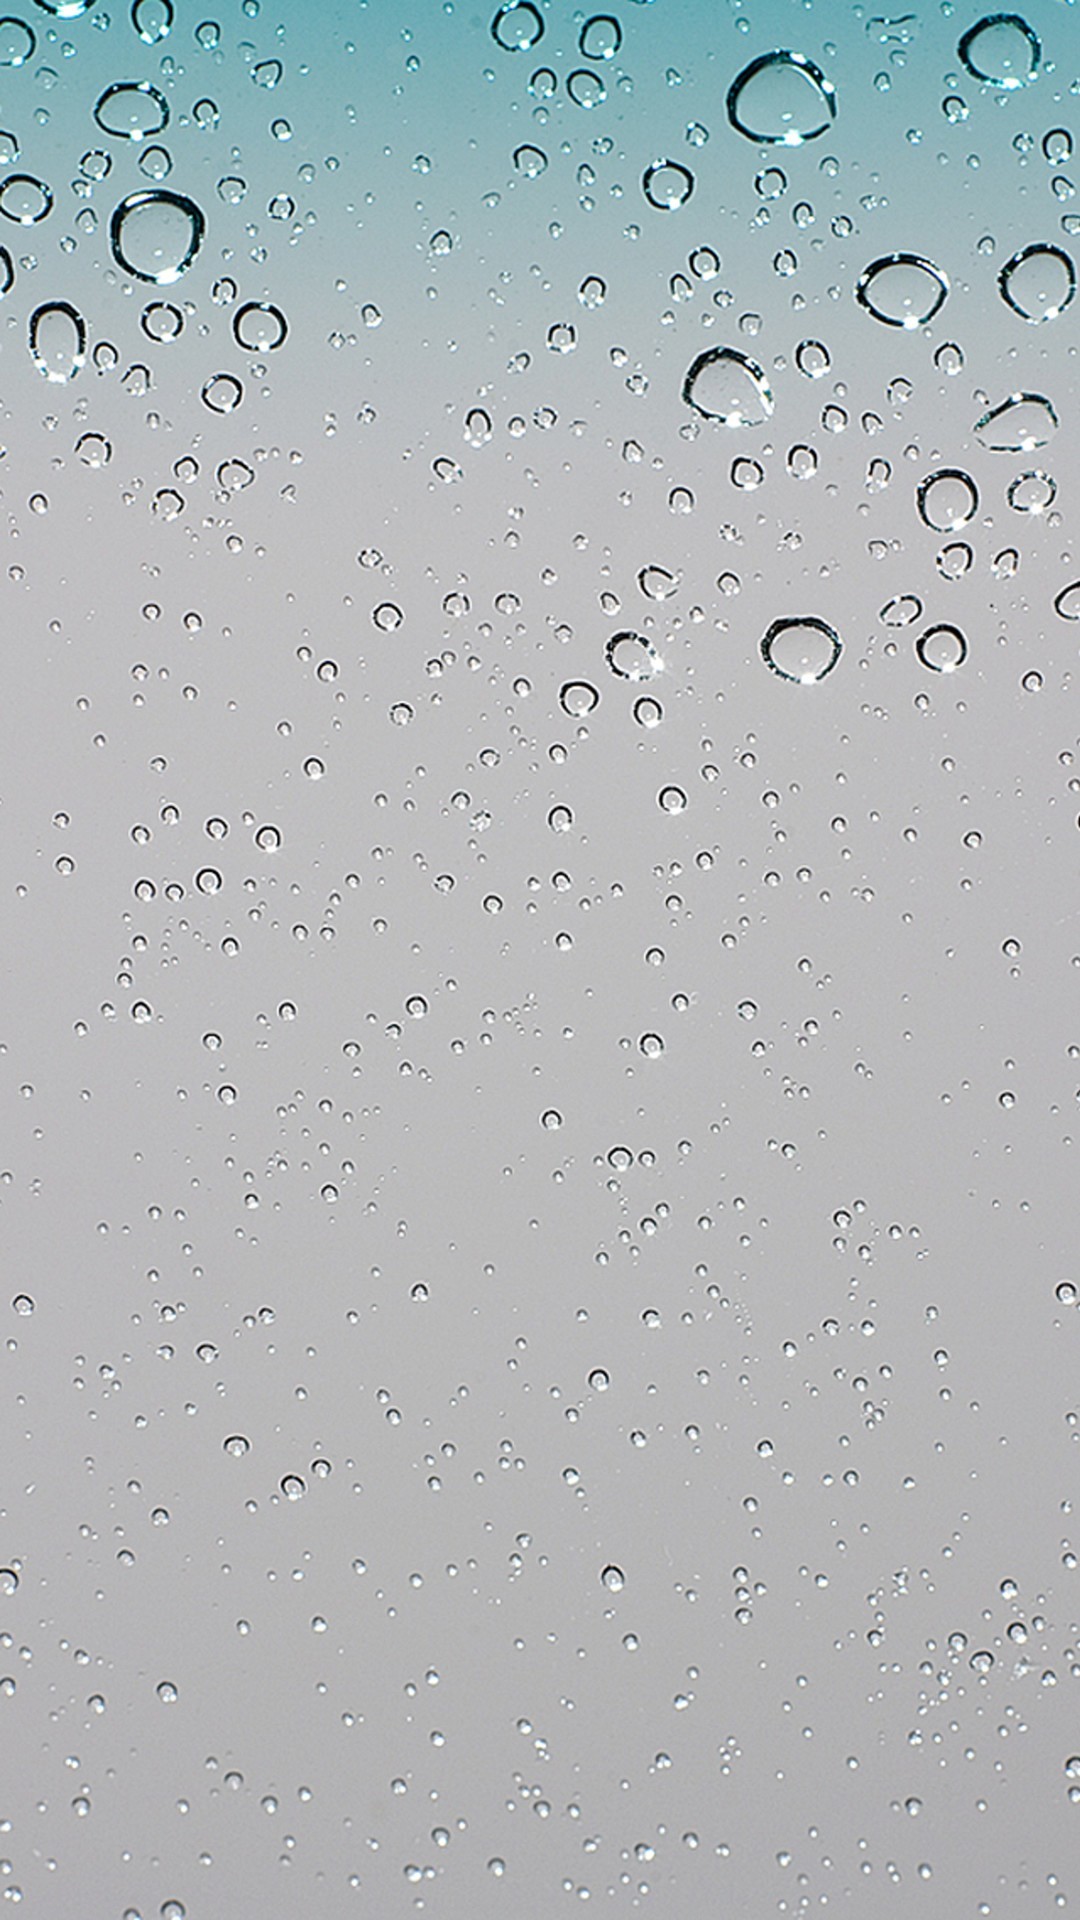 1080x1920 Water droplets